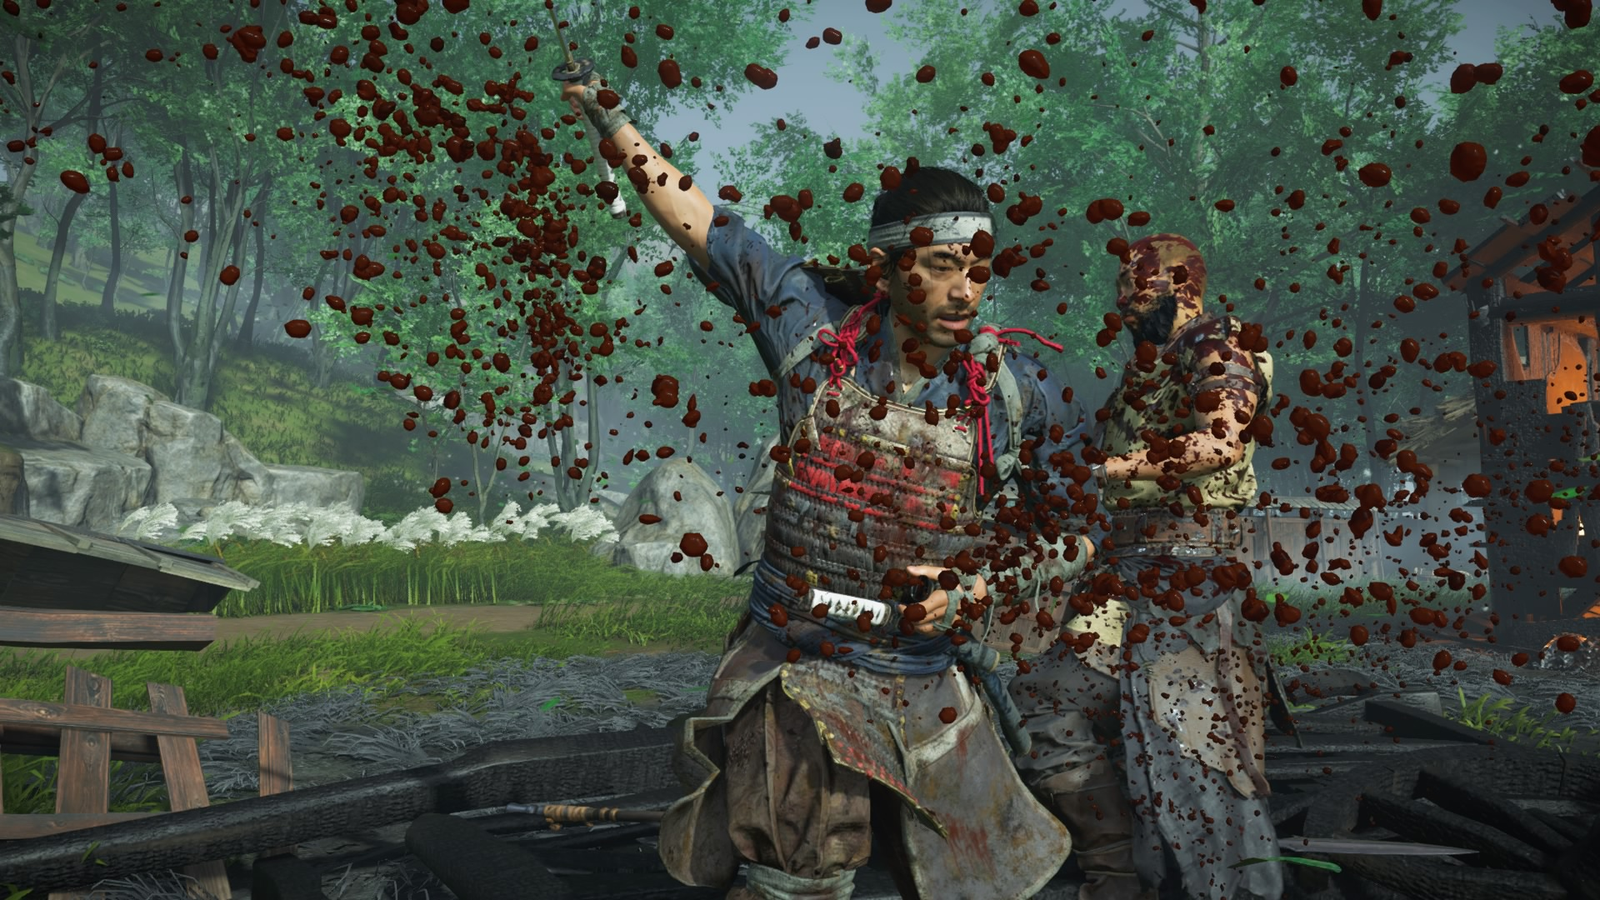 No, Ghost of Tsushima is not coming to PC (yet)